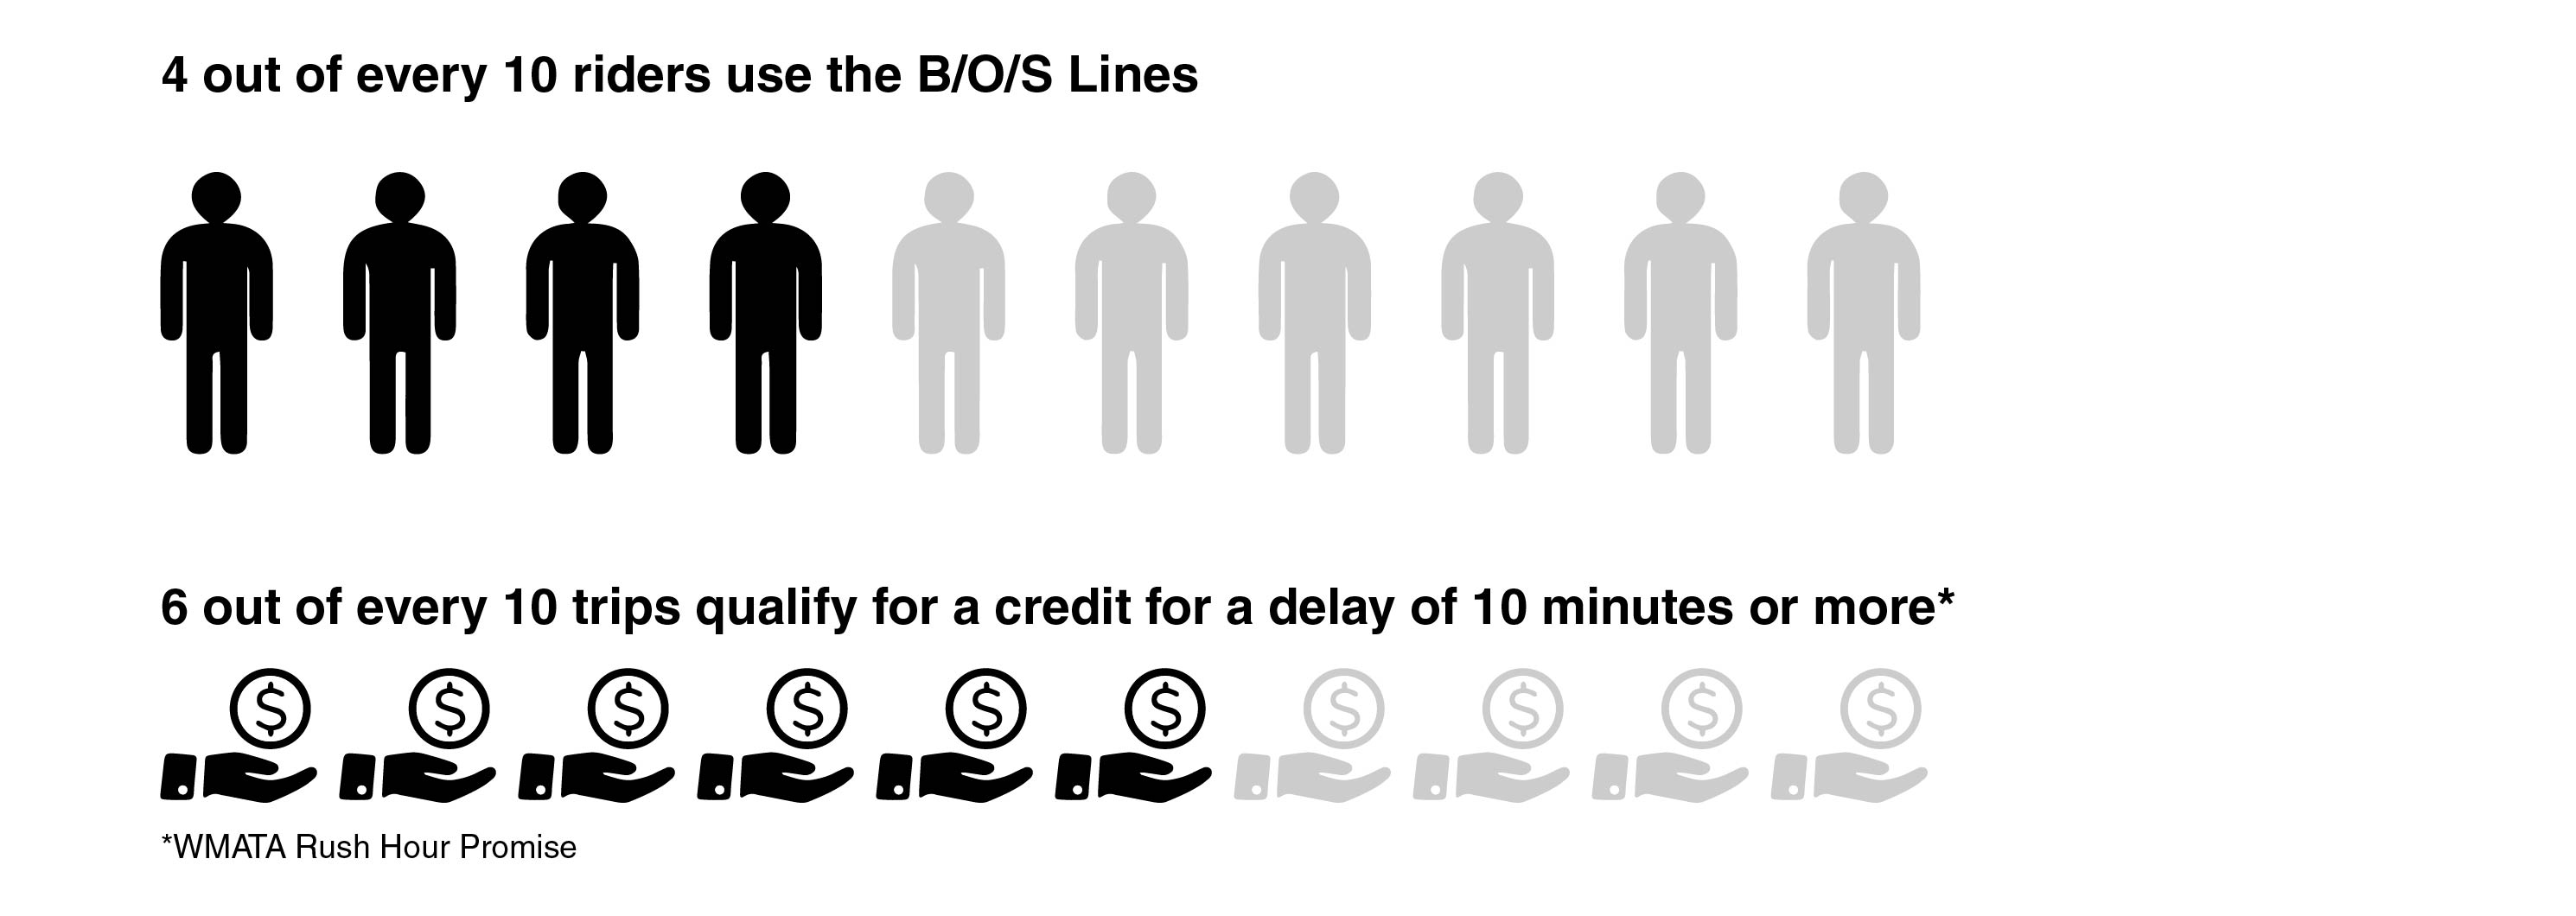 4 out of every 10 riders use the B-O-S lines. 6 out of every 10 trips qualify for a refund for a dleay of 15 minutes or more.*WMATA Rush Hour Promise